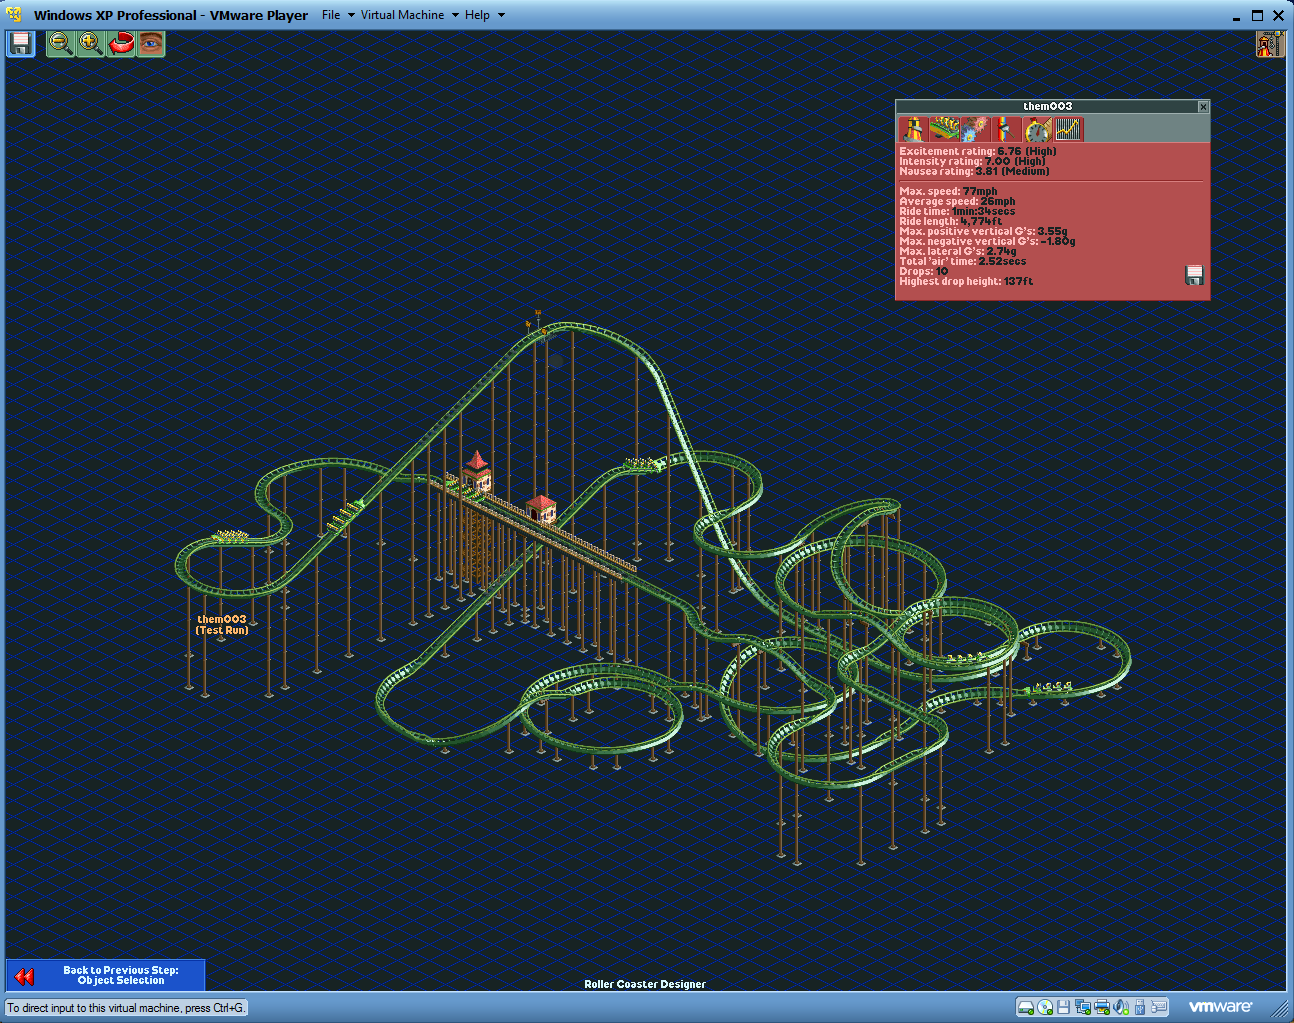 Jerry in Blunderland: this is a legitimate way to design a roller coaster.